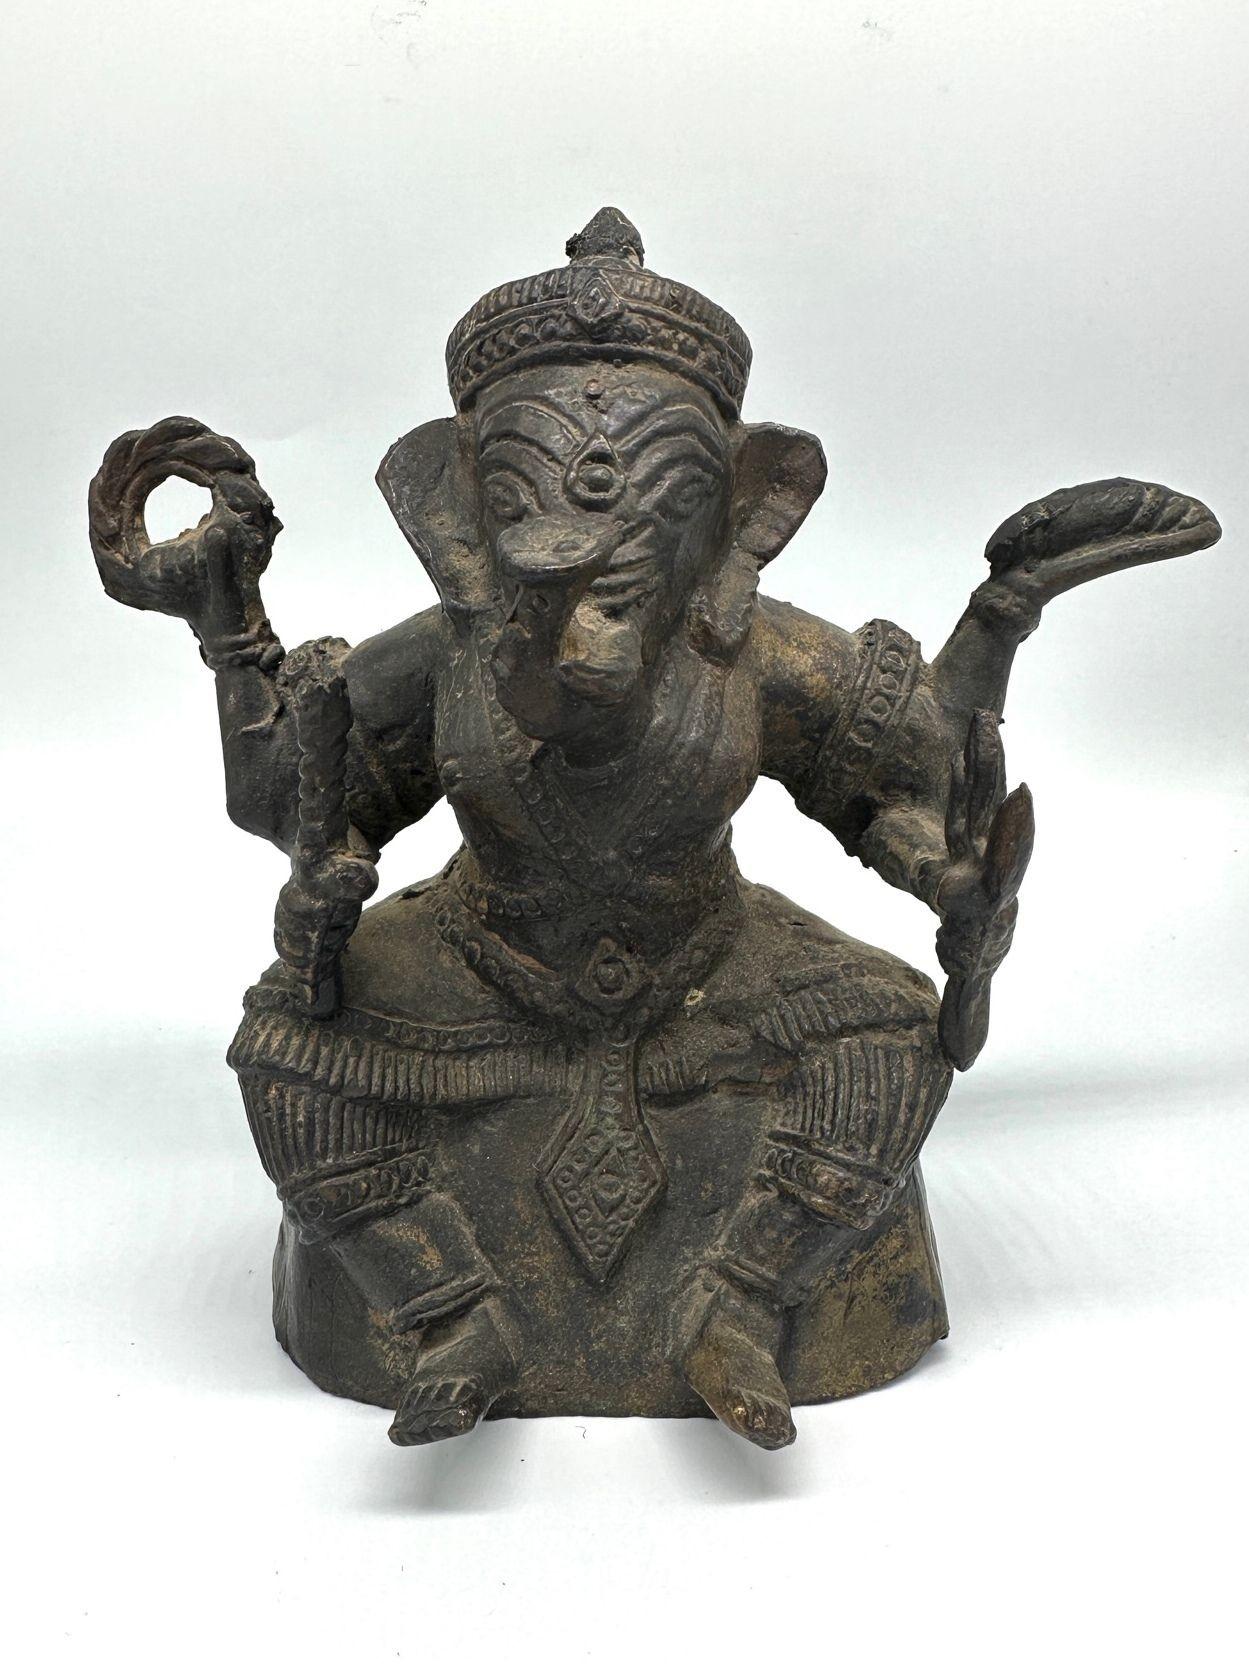 Antique Bronze Ganesha Seated Meditation 4 Hands Hindu Ganapati Sculpture of Ganesha, also known as Ganapati, is a revered Hindu deity widely worshipped as the remover of obstacles and the god of wisdom.
Depicted with an elephant head and a